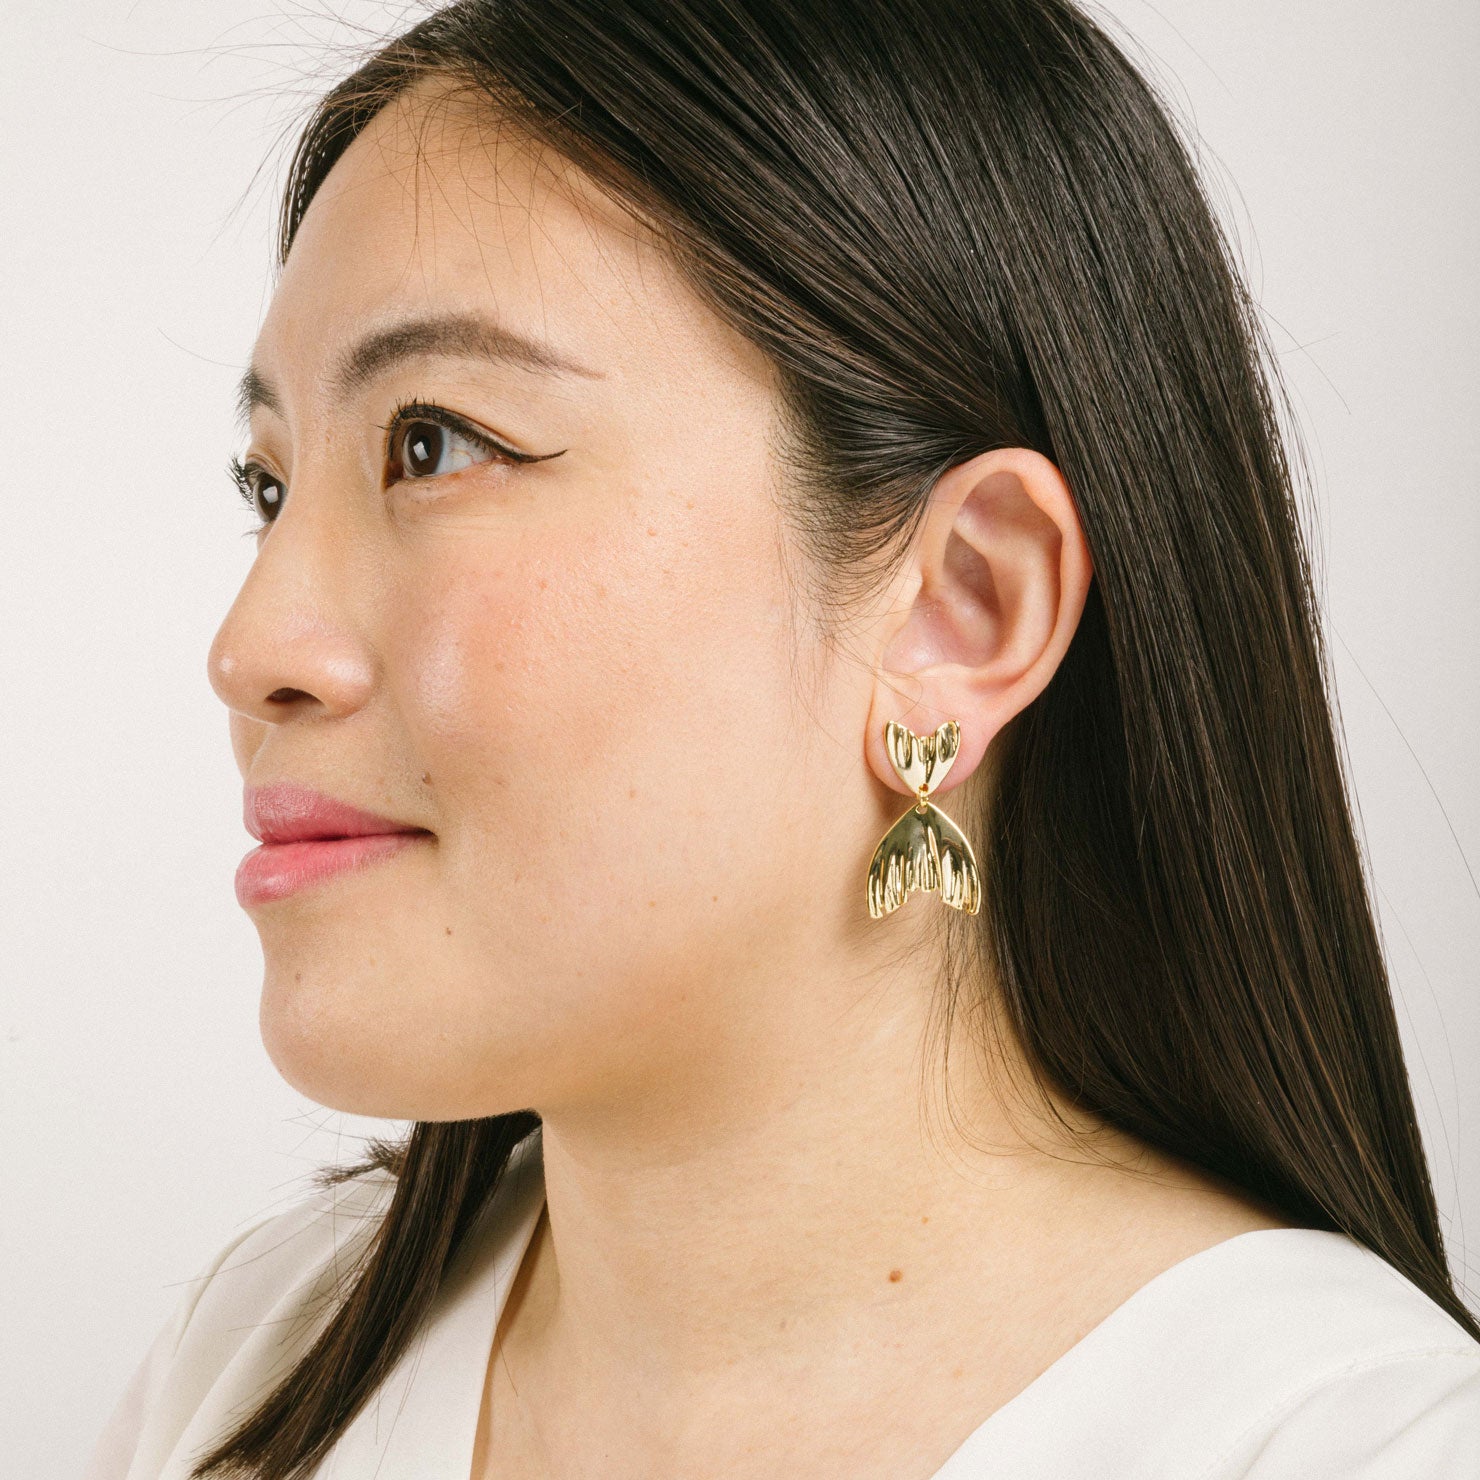 A model wearing the Mermaid Tail Clip On Earrings in Gold are perfect for all ear types including thick/large ears, sensitive ears, small/thin ears, and stretched/healing ears. With a zinc alloy body, these earrings offer a secure hold of up to 8-12 hours and come with removable rubber padding. Please note, item is only one pair.